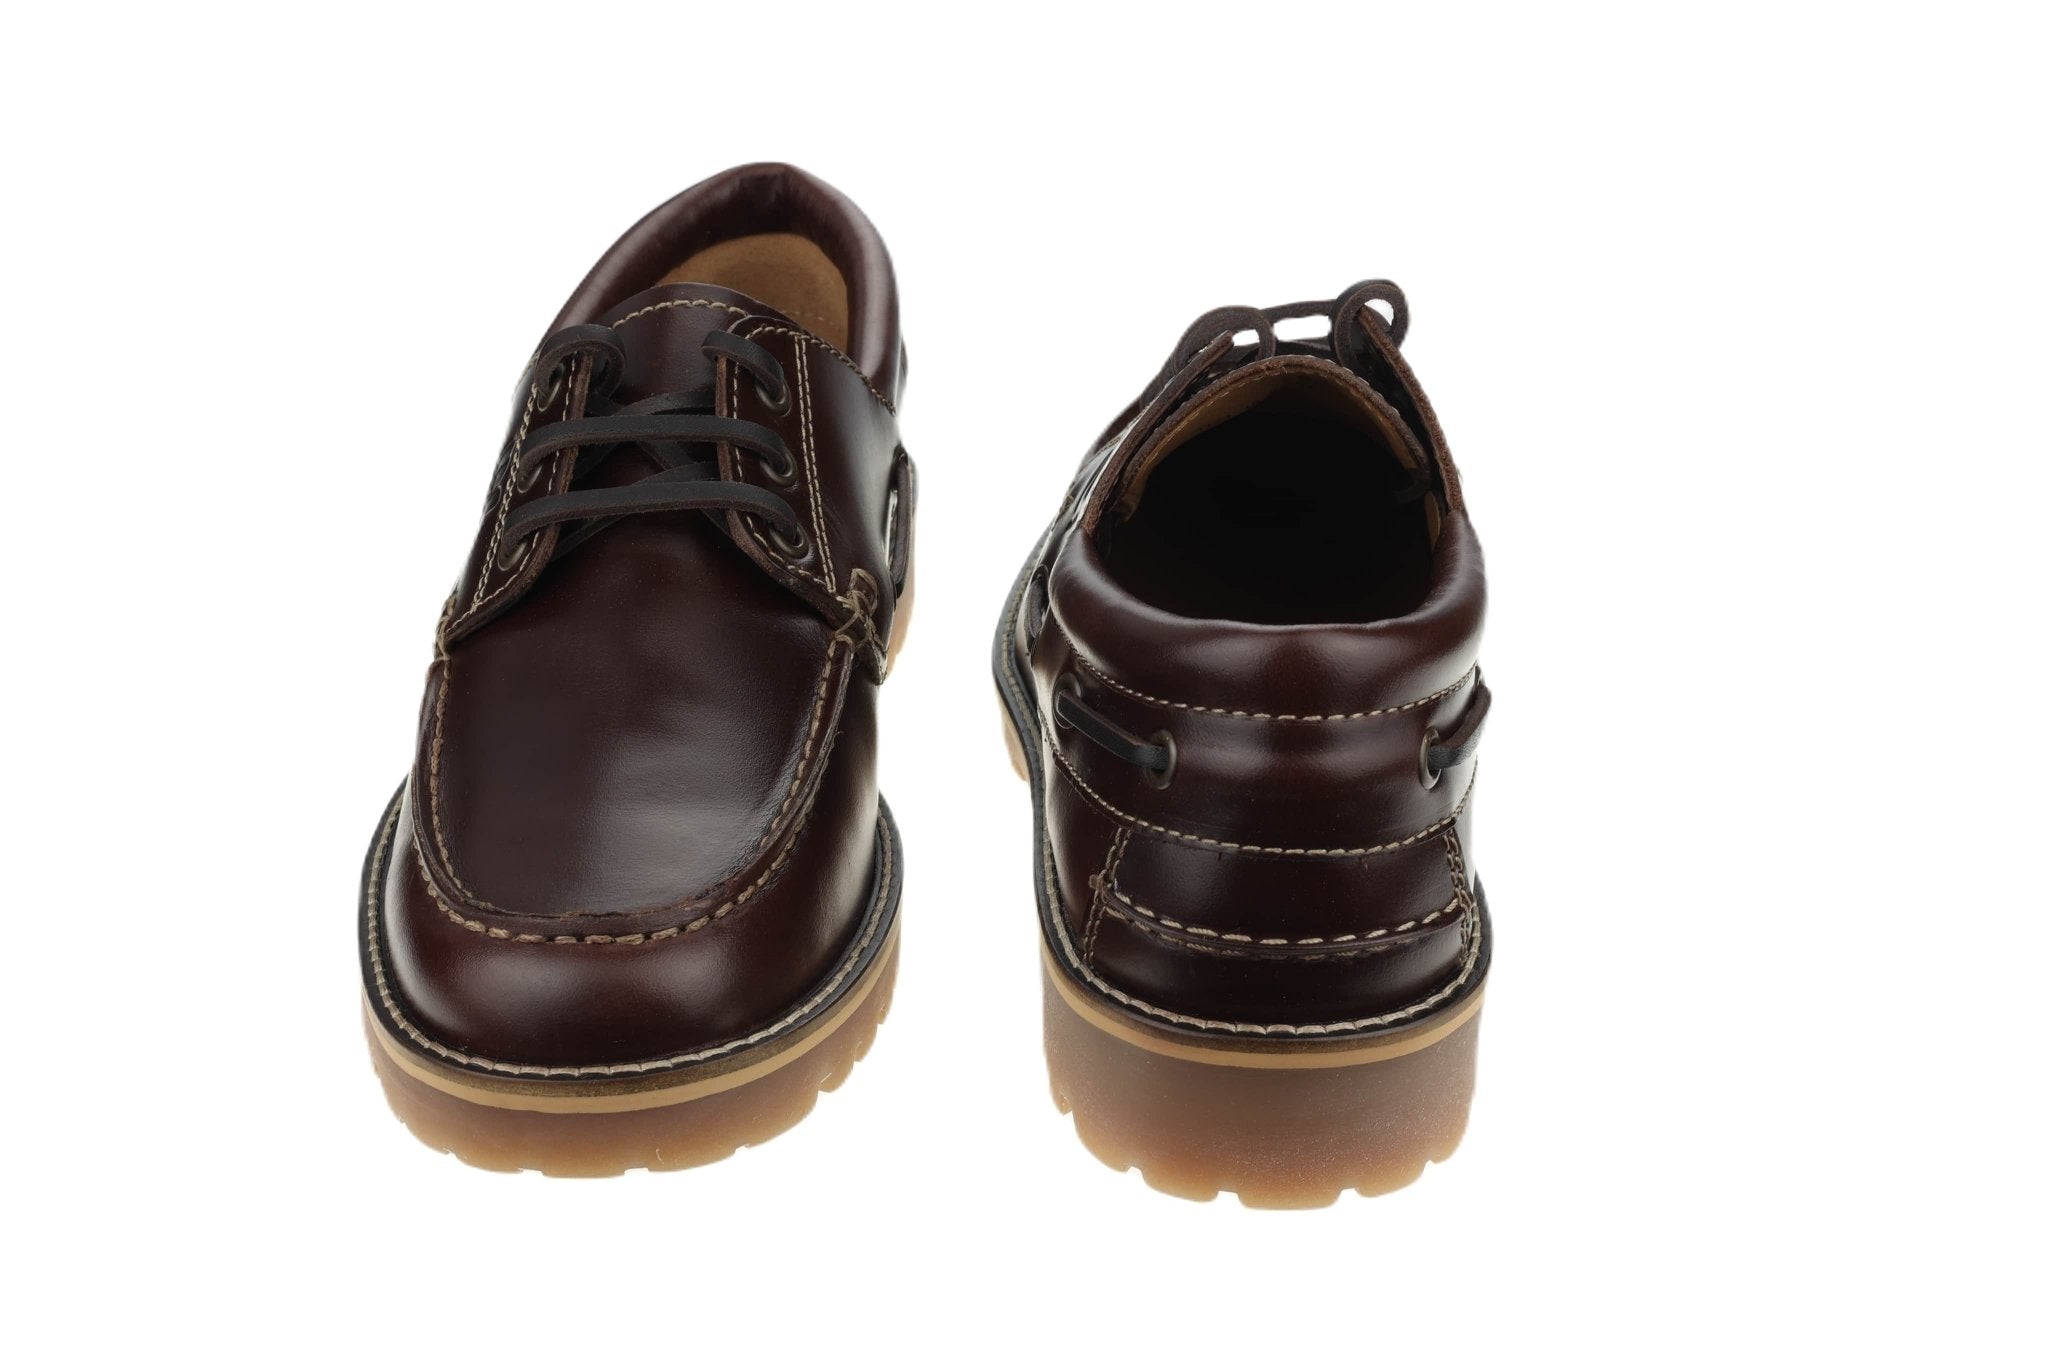 '1121.10.04' men's lace-up boat shoe - Pius by Gabor - Chaplinshoes'1121.10.04' men's lace-up boat shoe - Pius by GaborPius Gabor